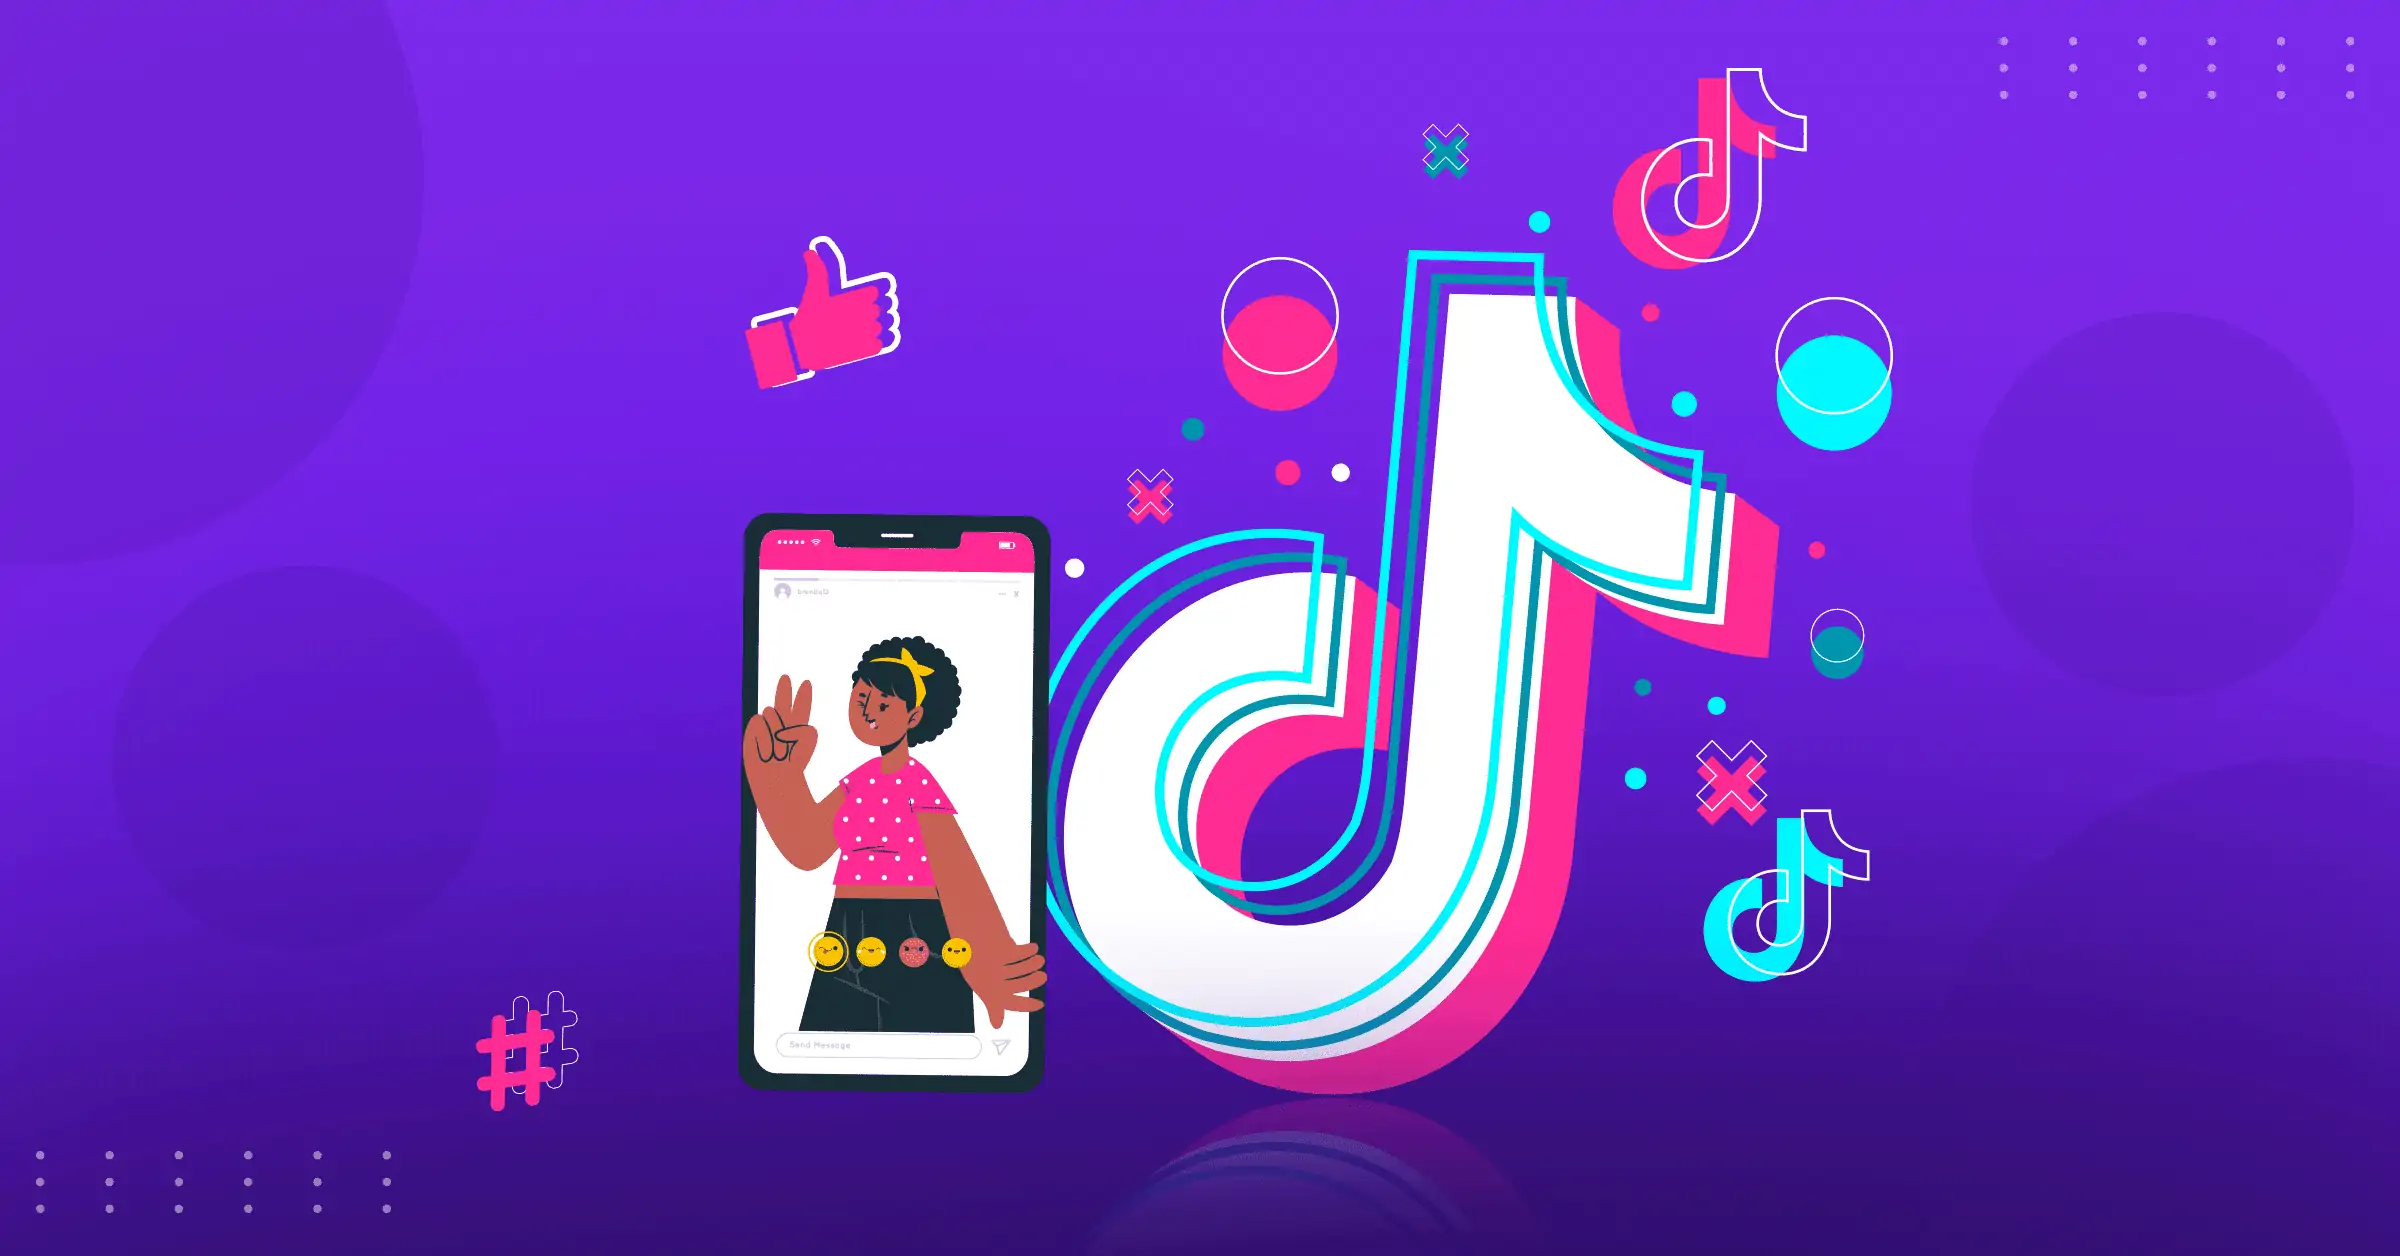 This is the banner image of the blog post that includes top apps like TikTok in India